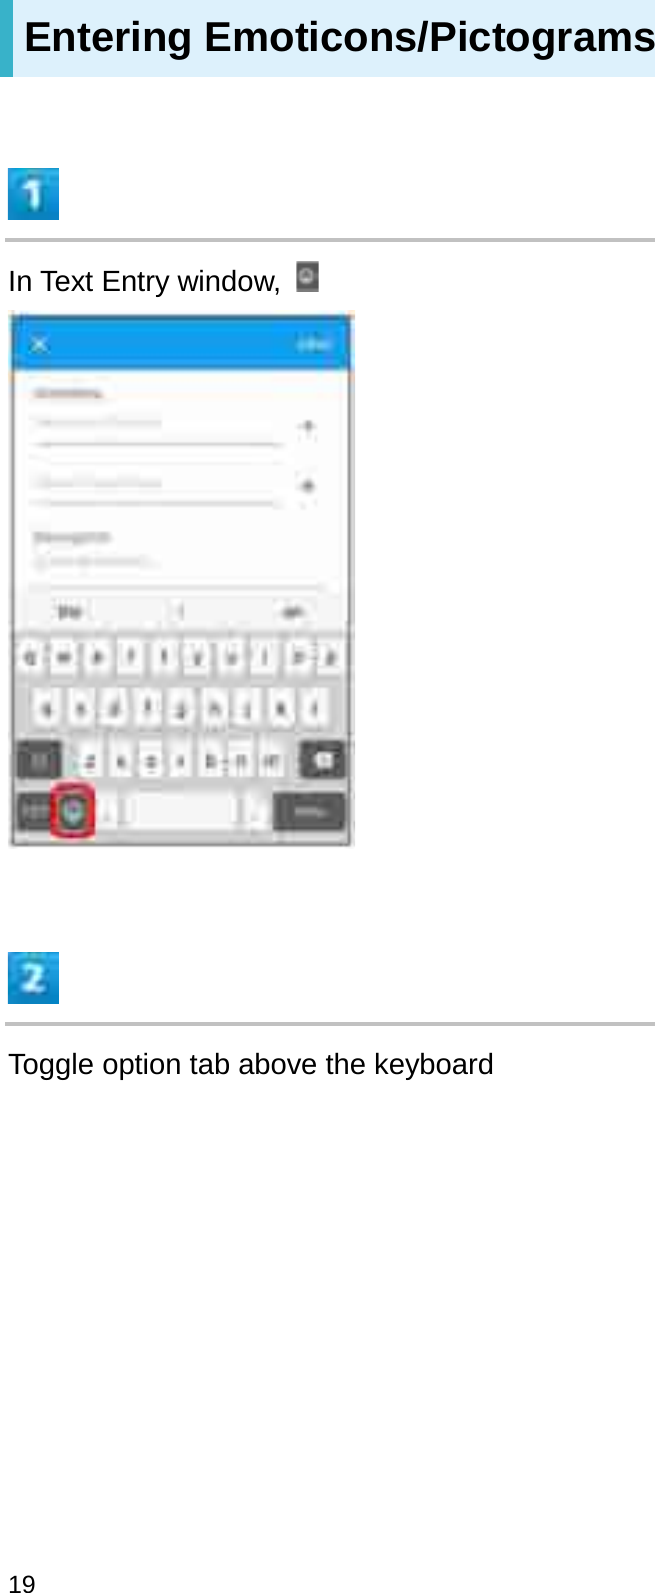 Entering Emoticons/PictogramsIn Text Entry window,Toggle option tab above the keyboard19